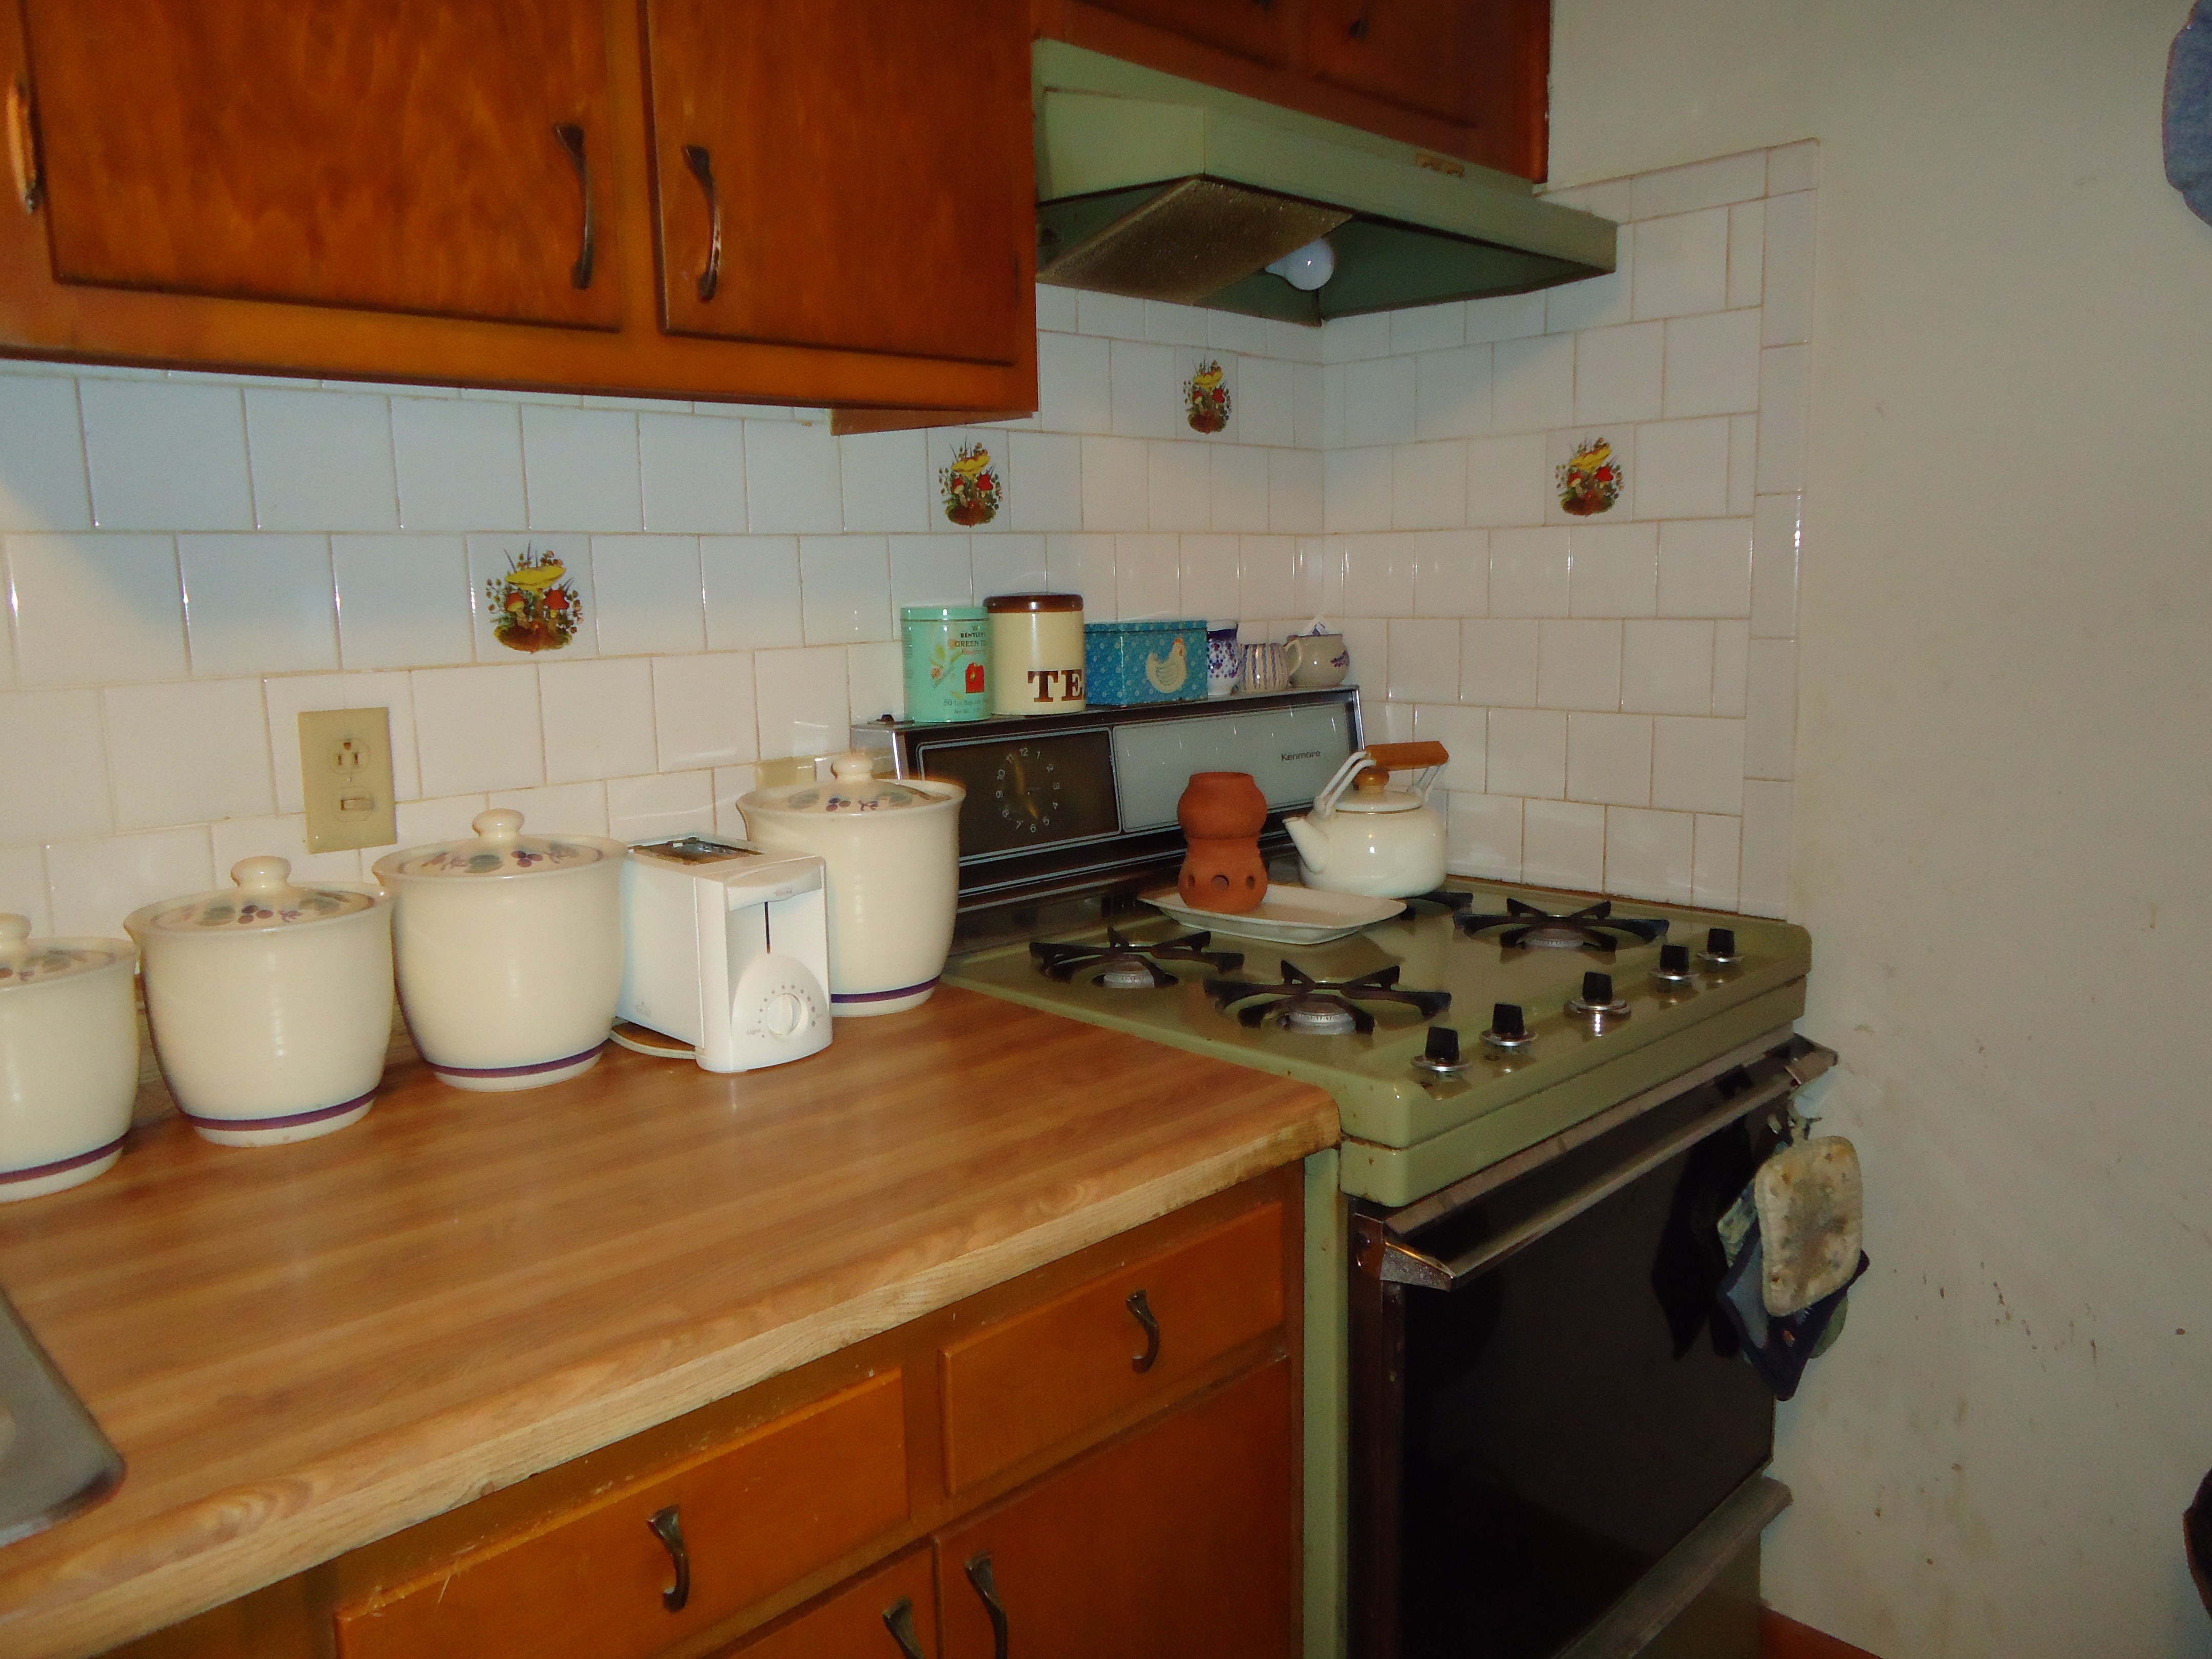 Kitchen counter and stove photo